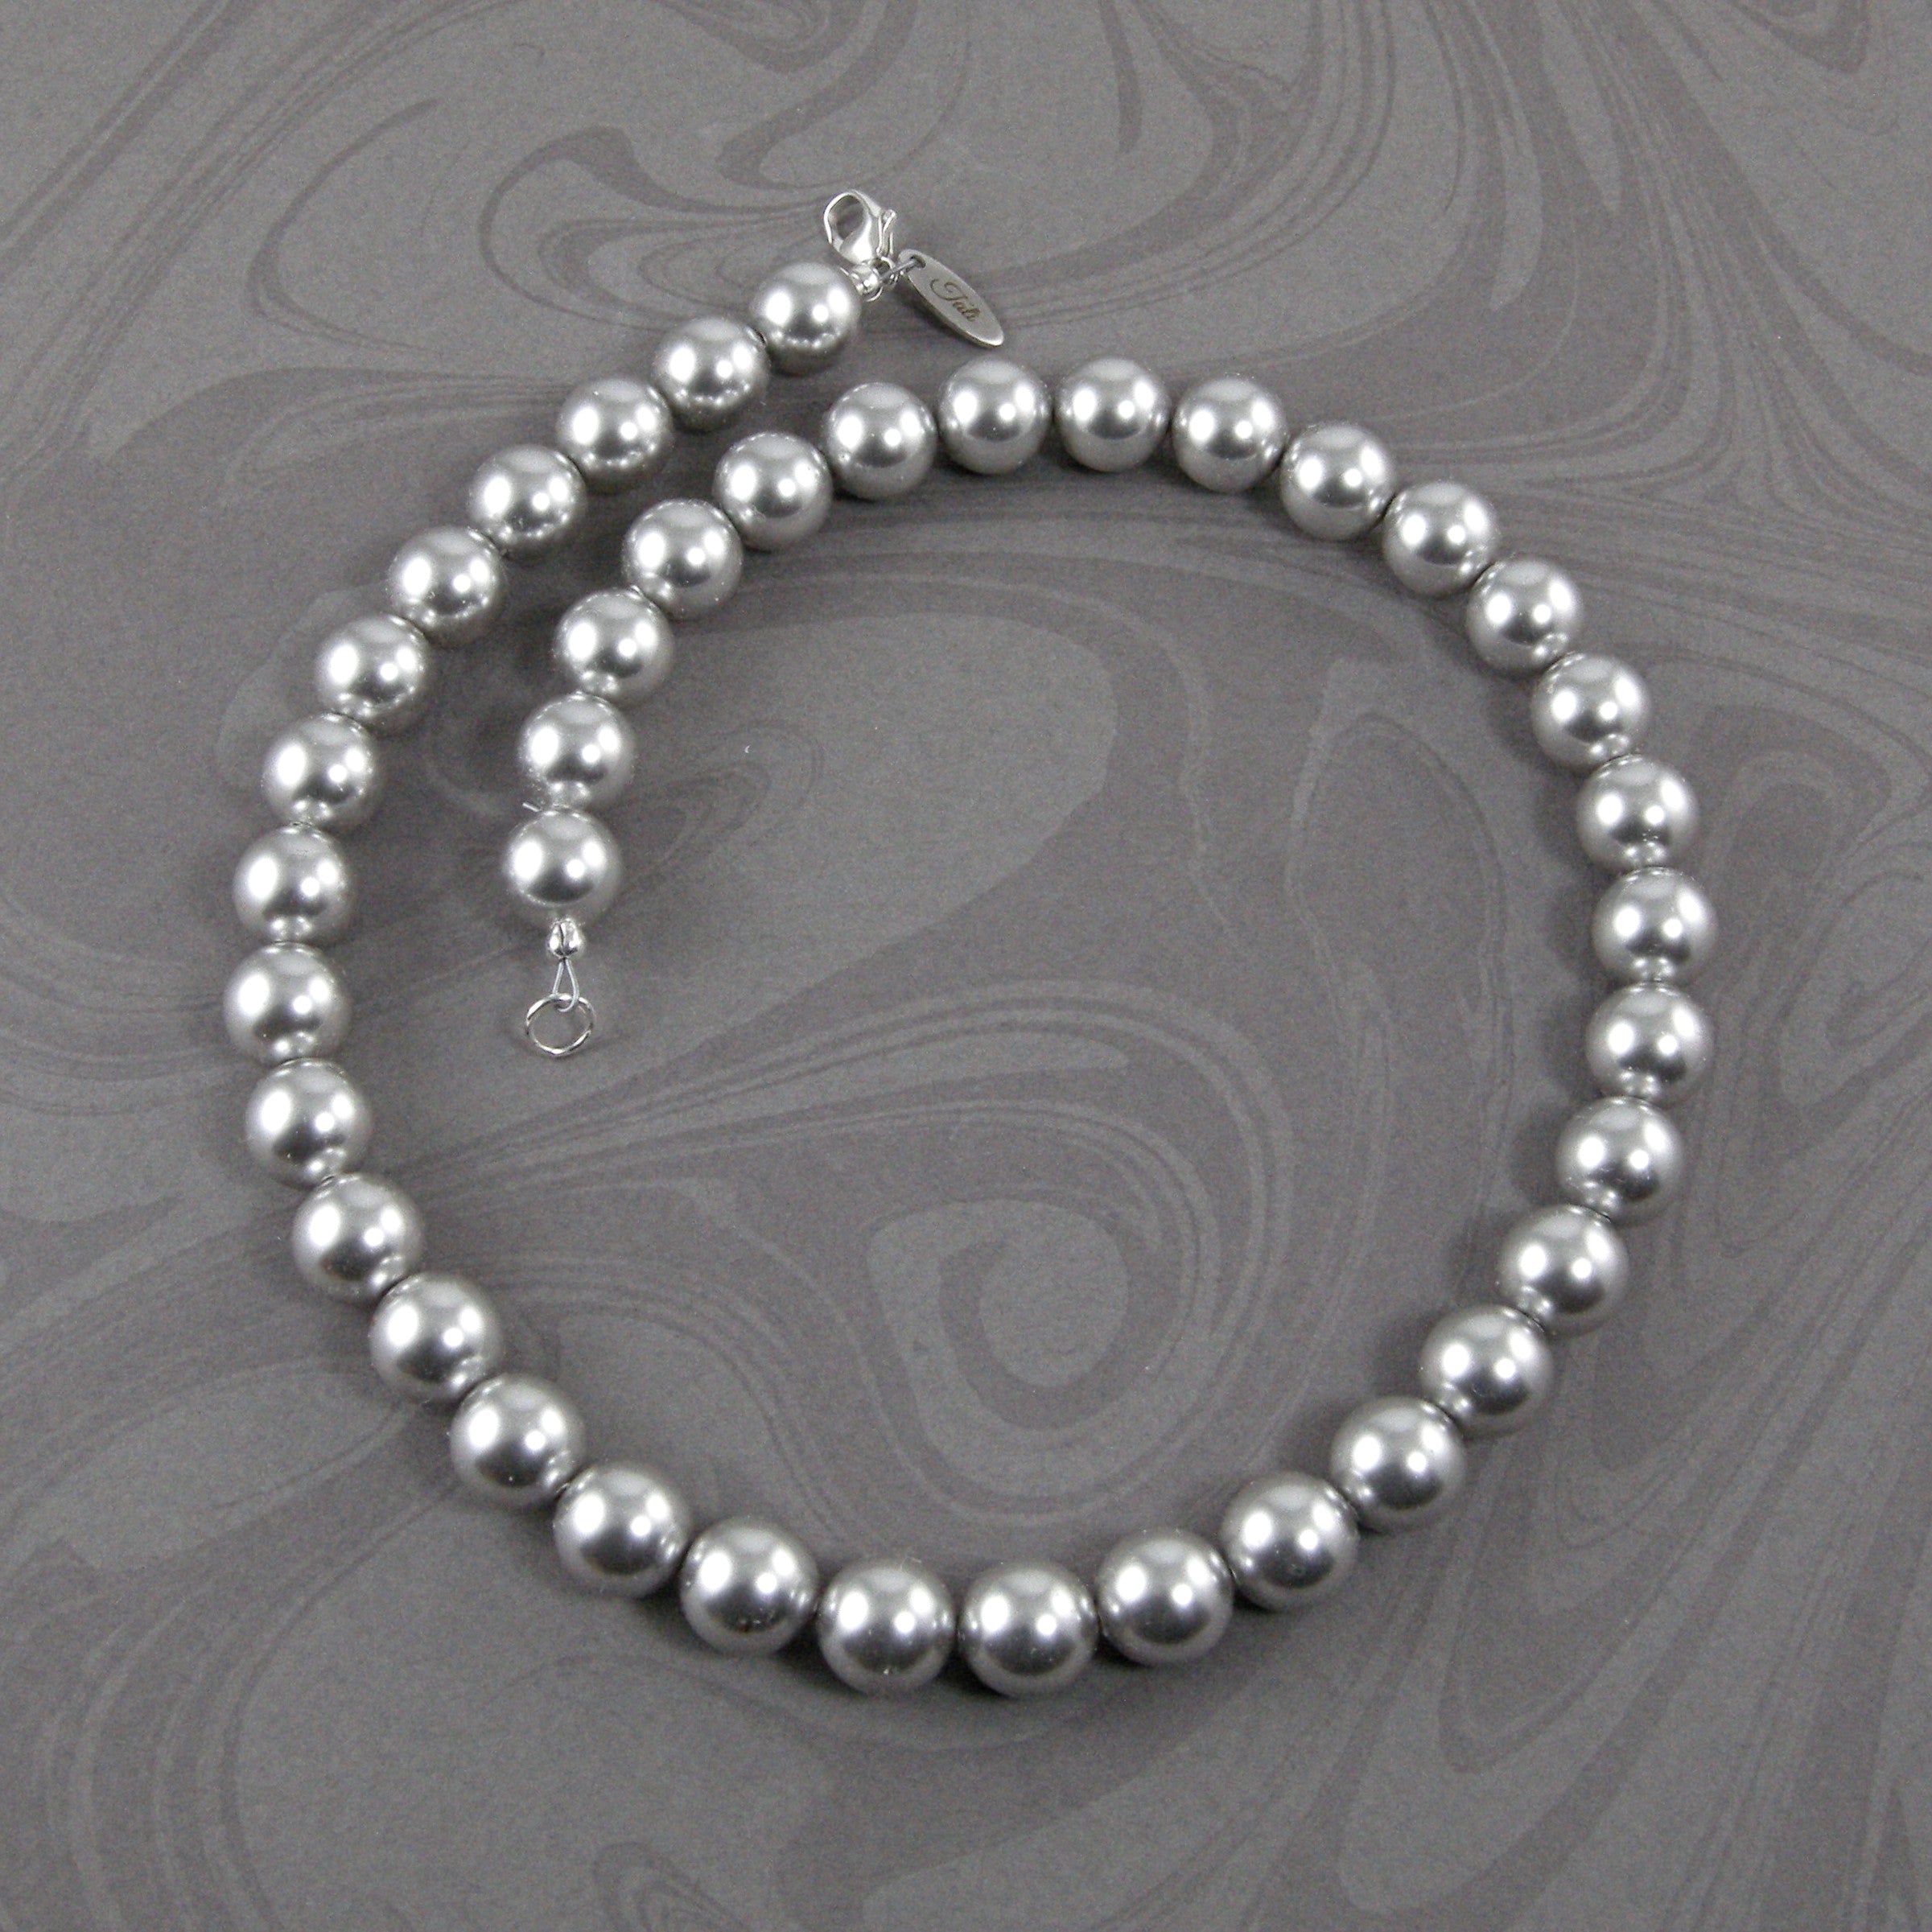 Gray Pearl Necklace, Silvery Gray Pearl Necklace, Large Gray Pearl Necklace